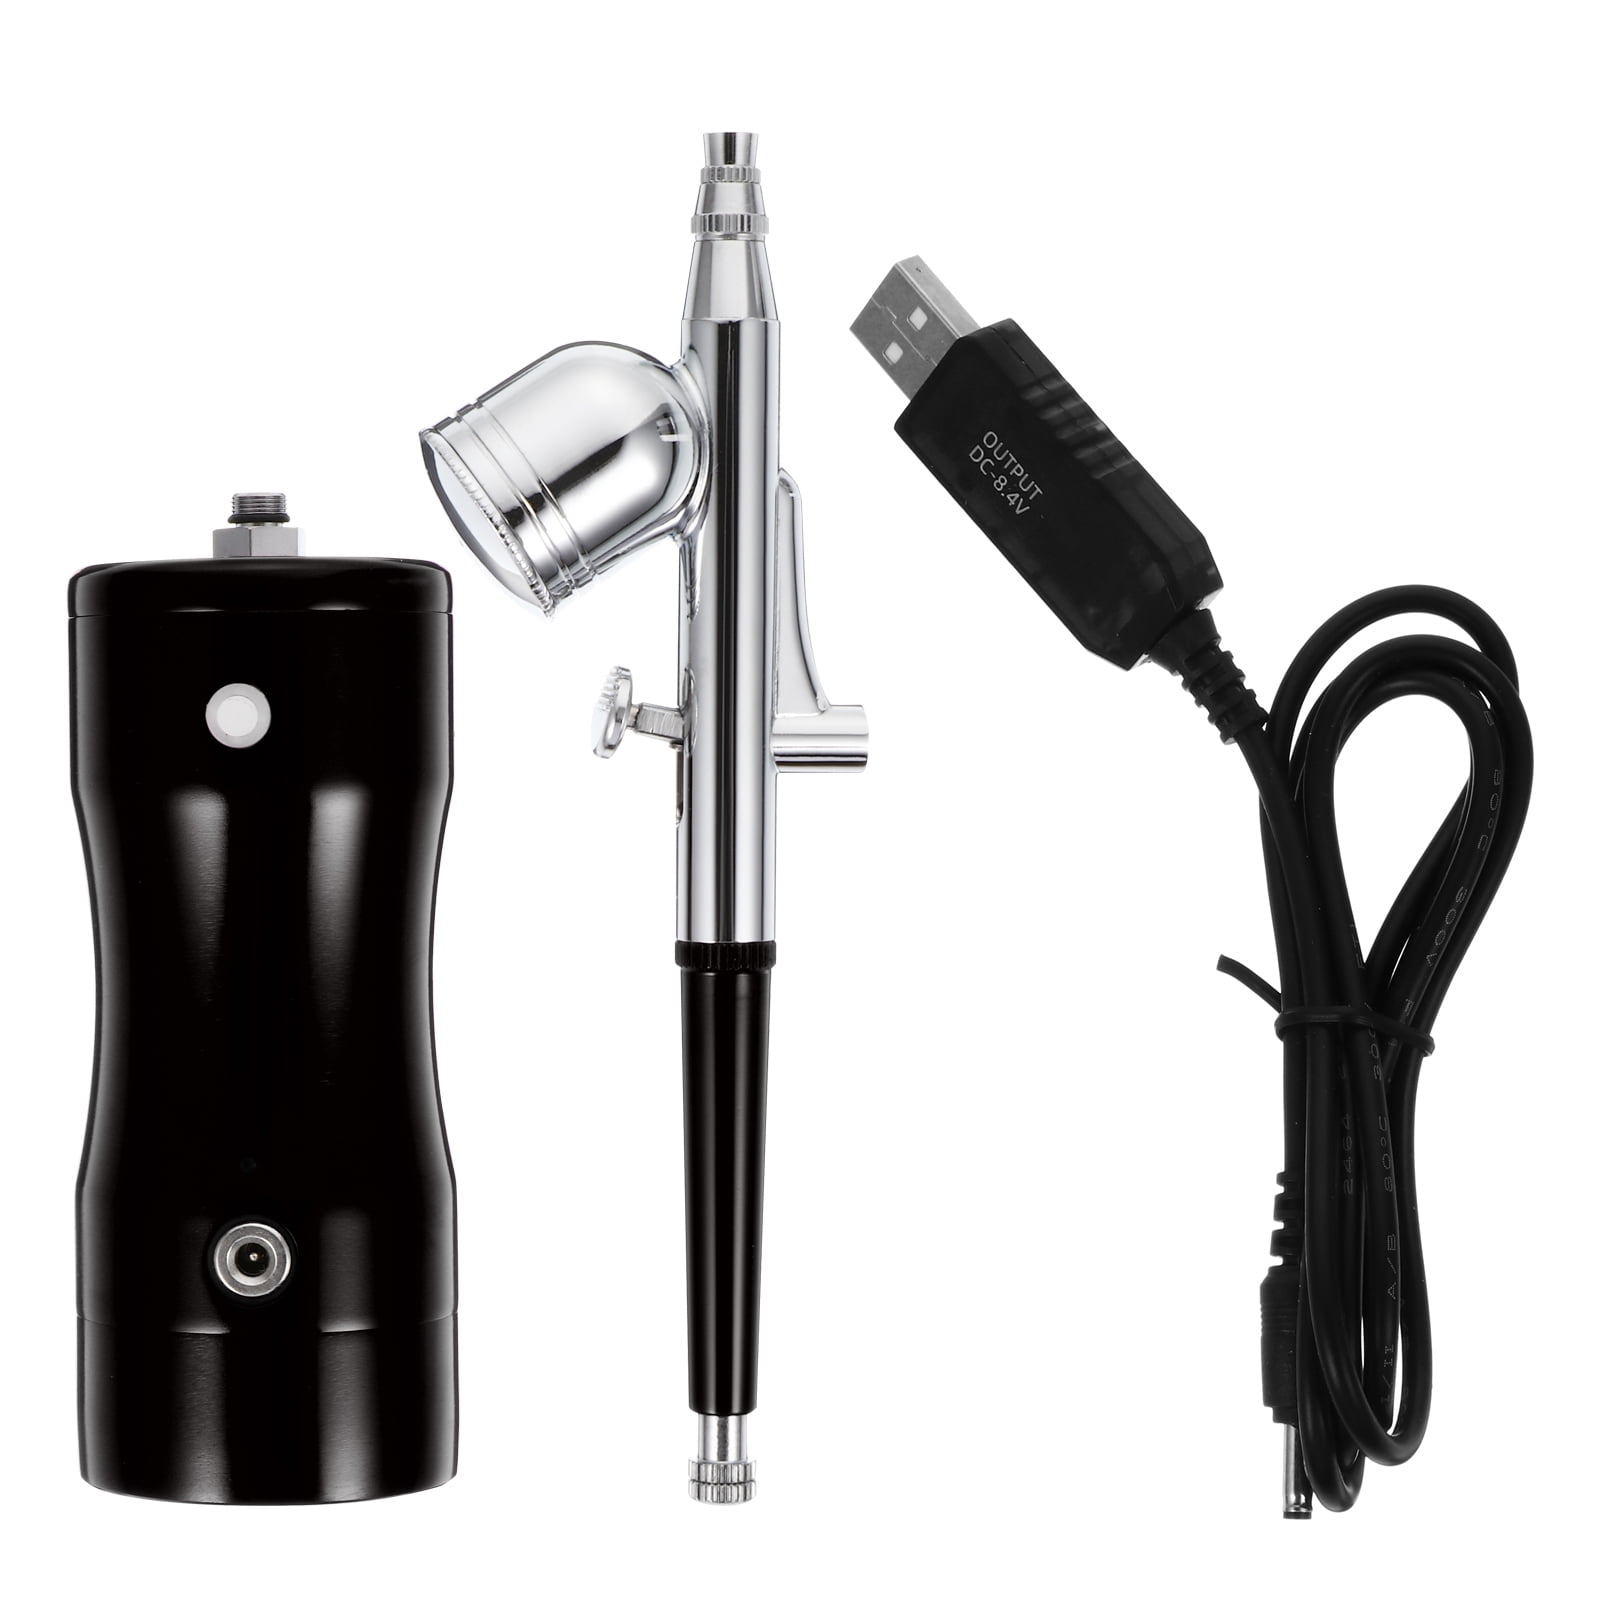 AceFox Cordless Airbrush Kit with Compressor, Portable Airbrush Painting  Set, 36PSI Rechargeable Handheld Nail Airbrush Machine, Ideal for Makeup